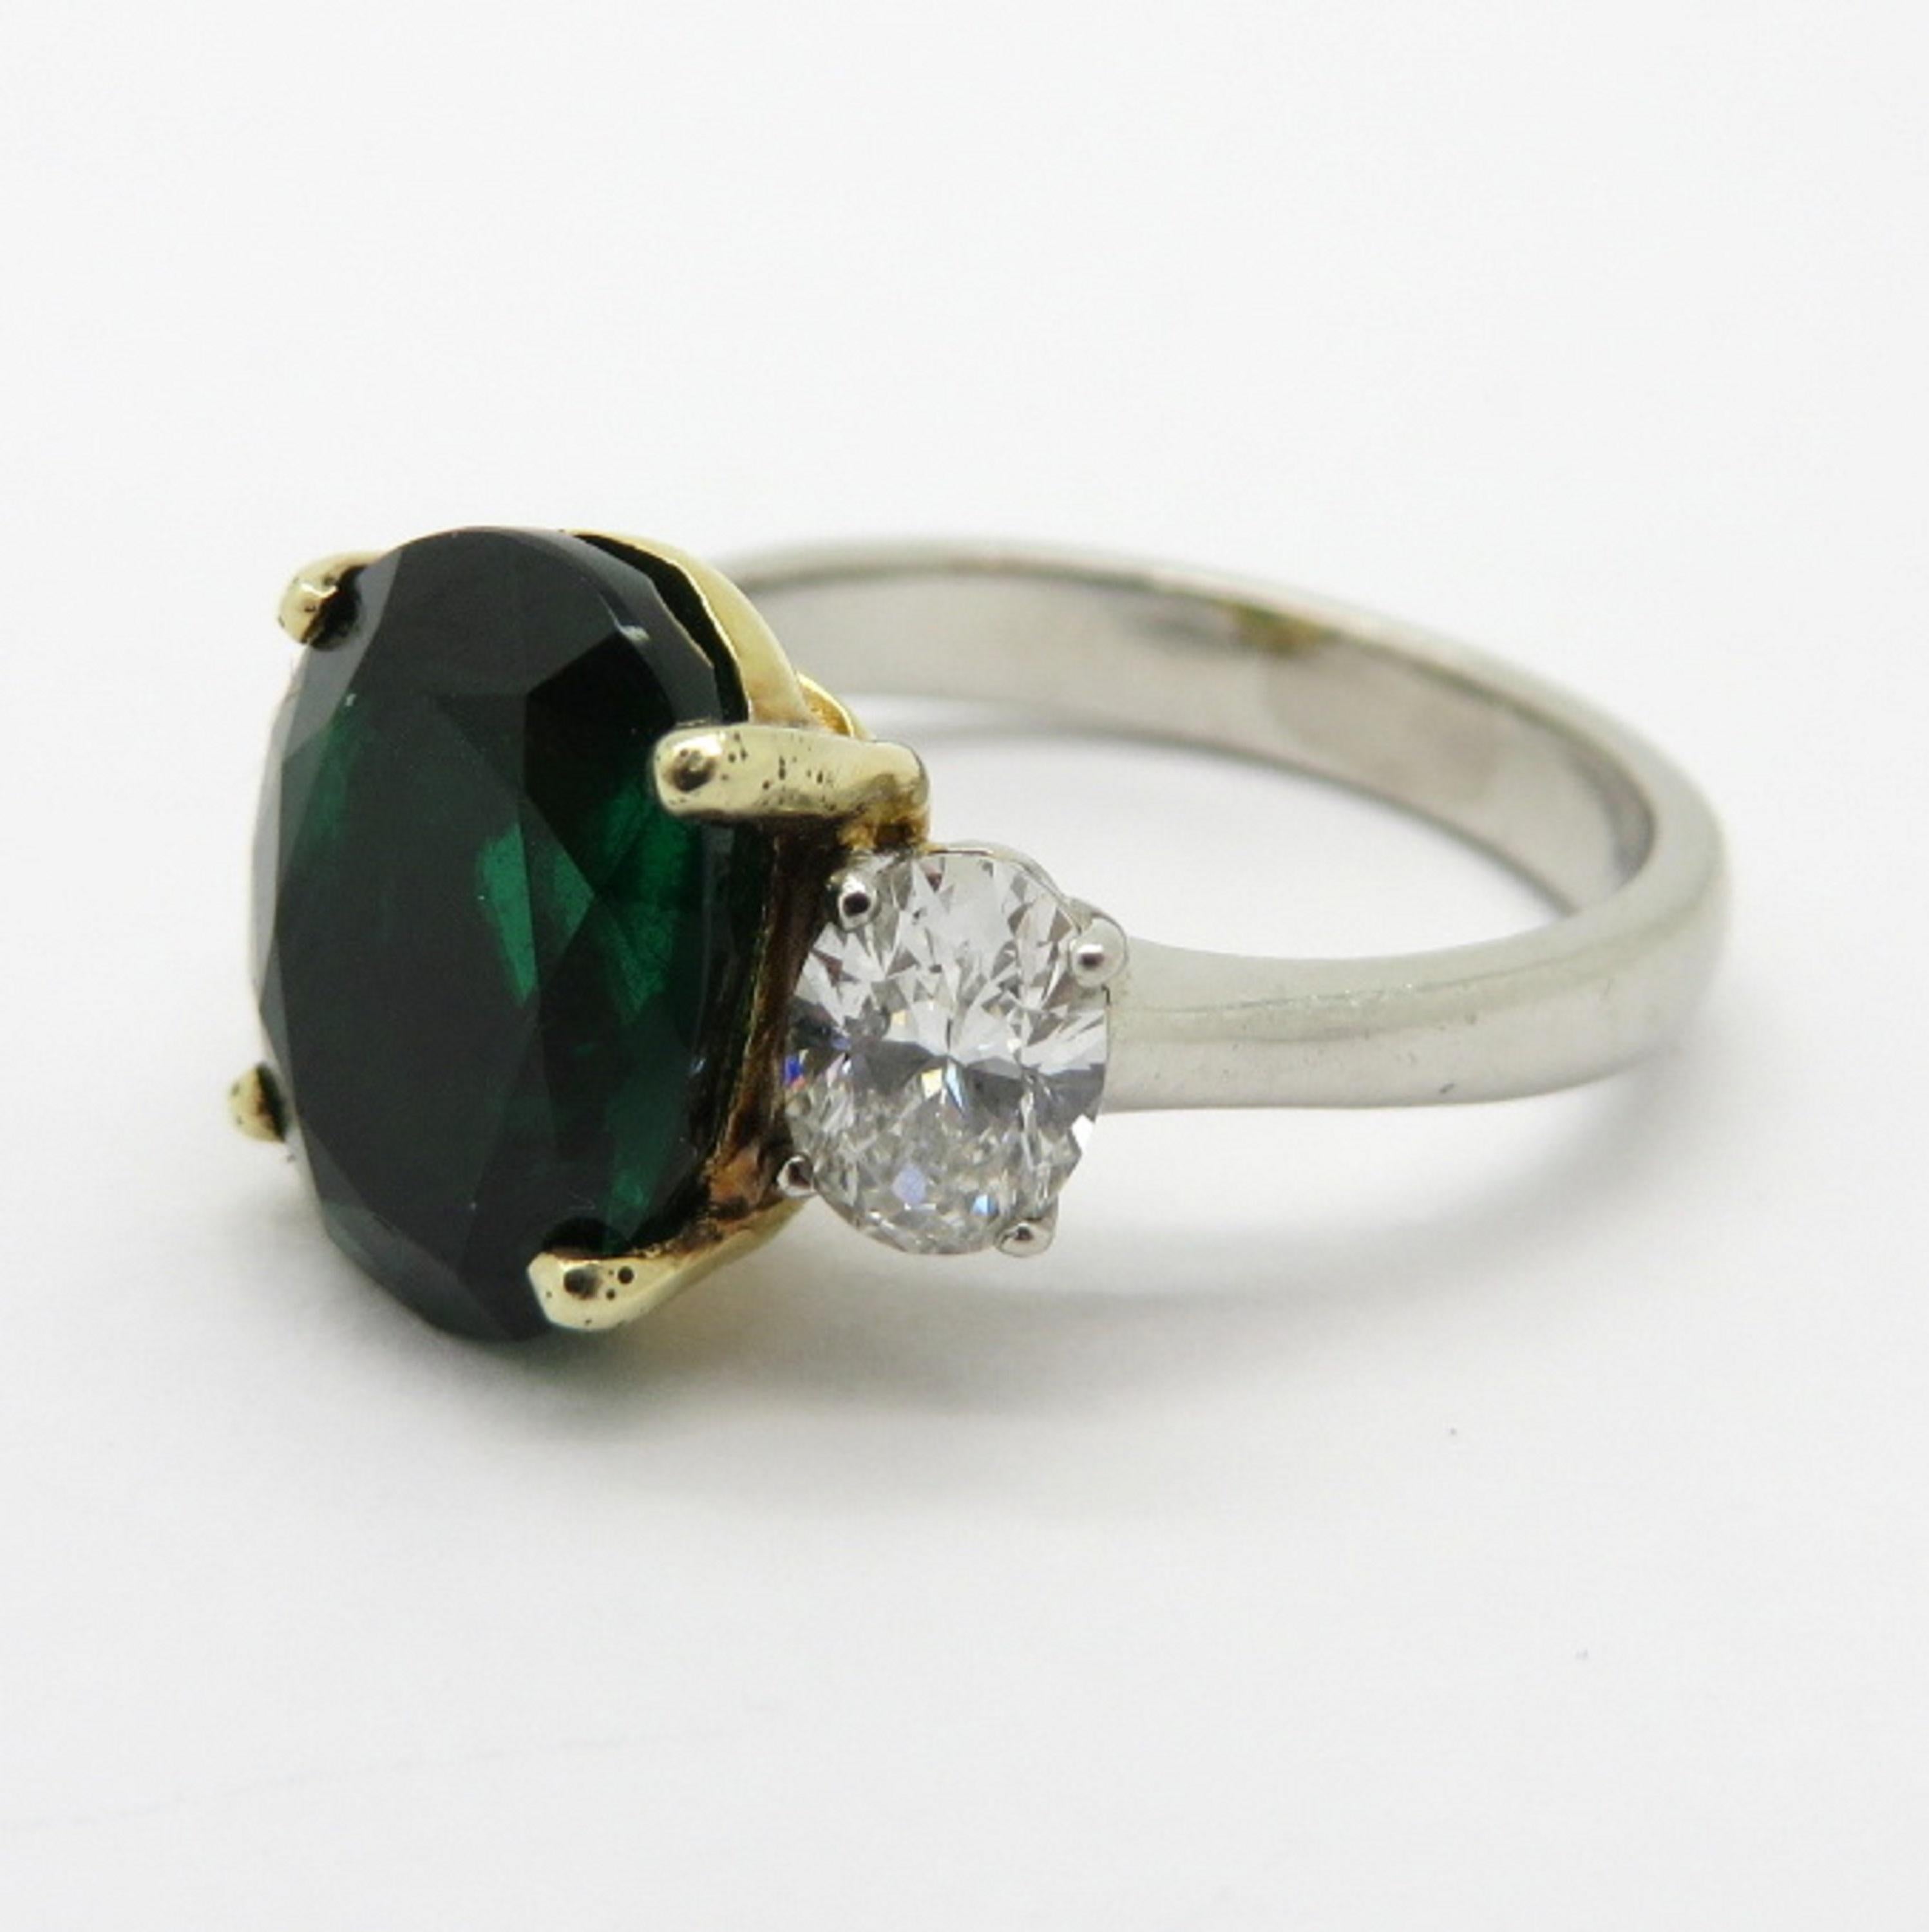 For sale is a gorgeous three stone ring that can symbolize your Past, Present, and Future together.
Crafted out of 18K Solid Yellow Gold and Platinum.
The Emerald in the center is four prong set, and includes an AGL- American Gemological Laboratory